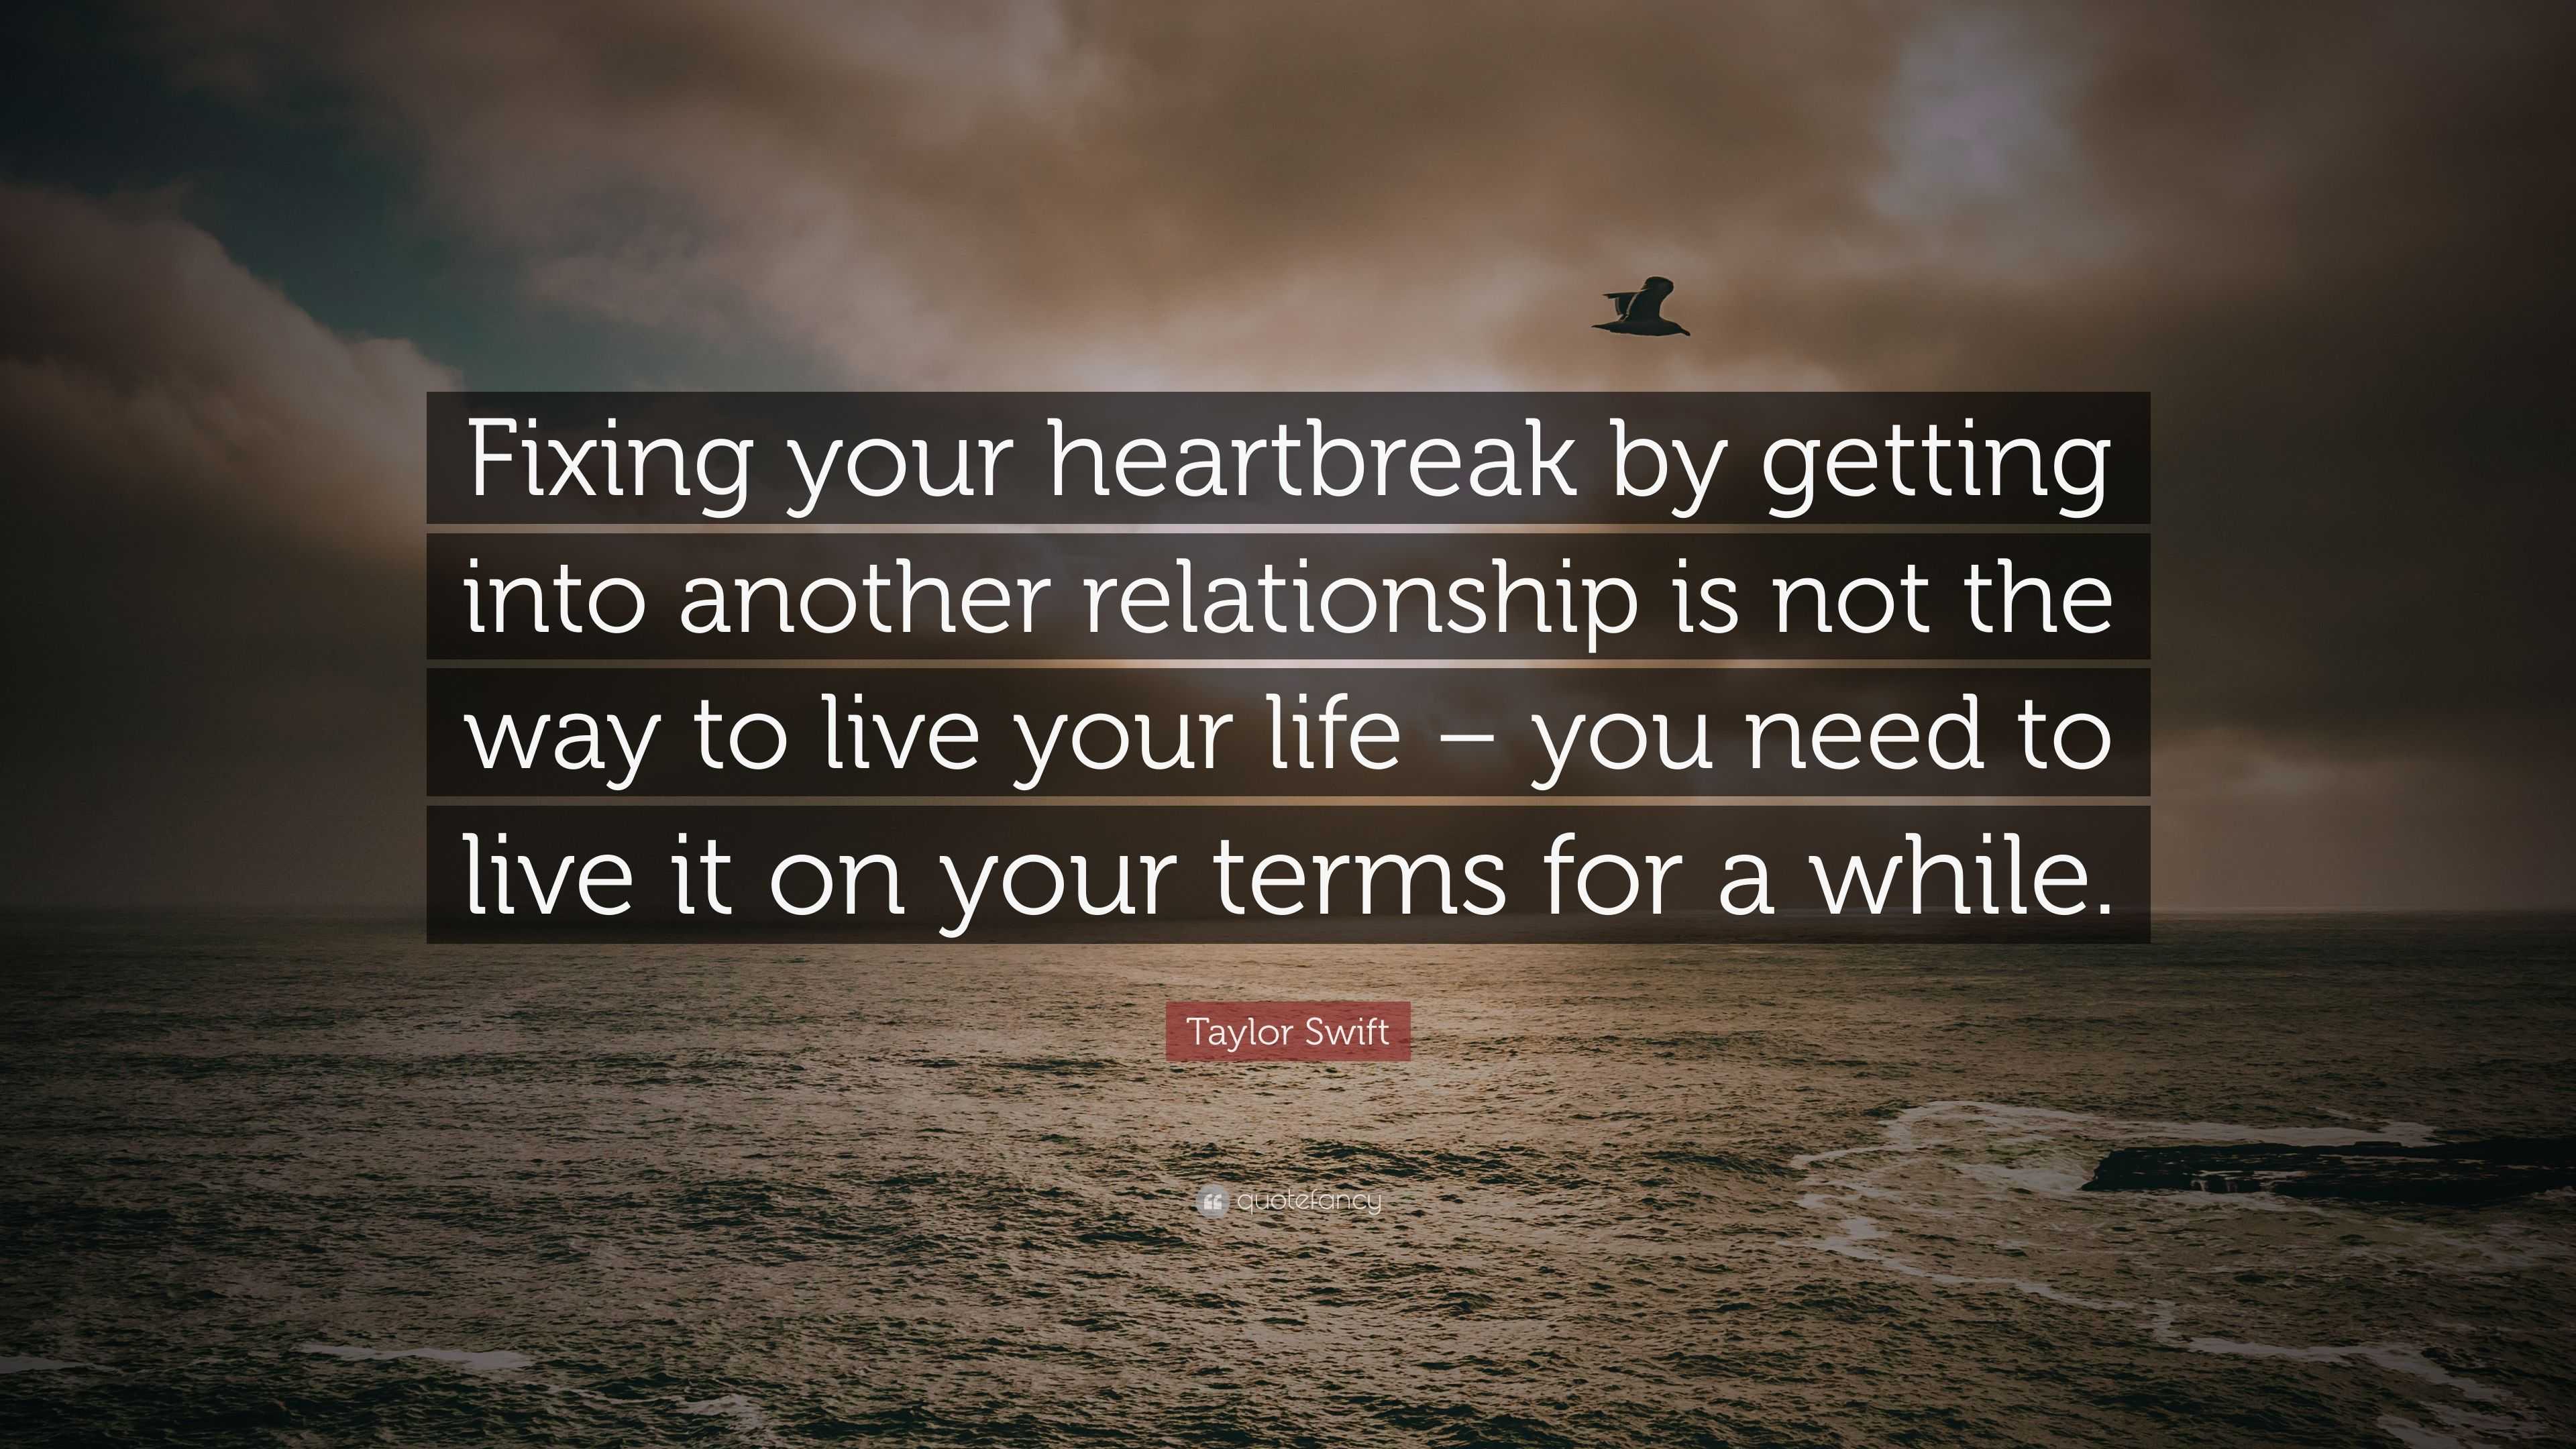 Taylor Swift Quote “Fixing your heartbreak by ting into another relationship is not the